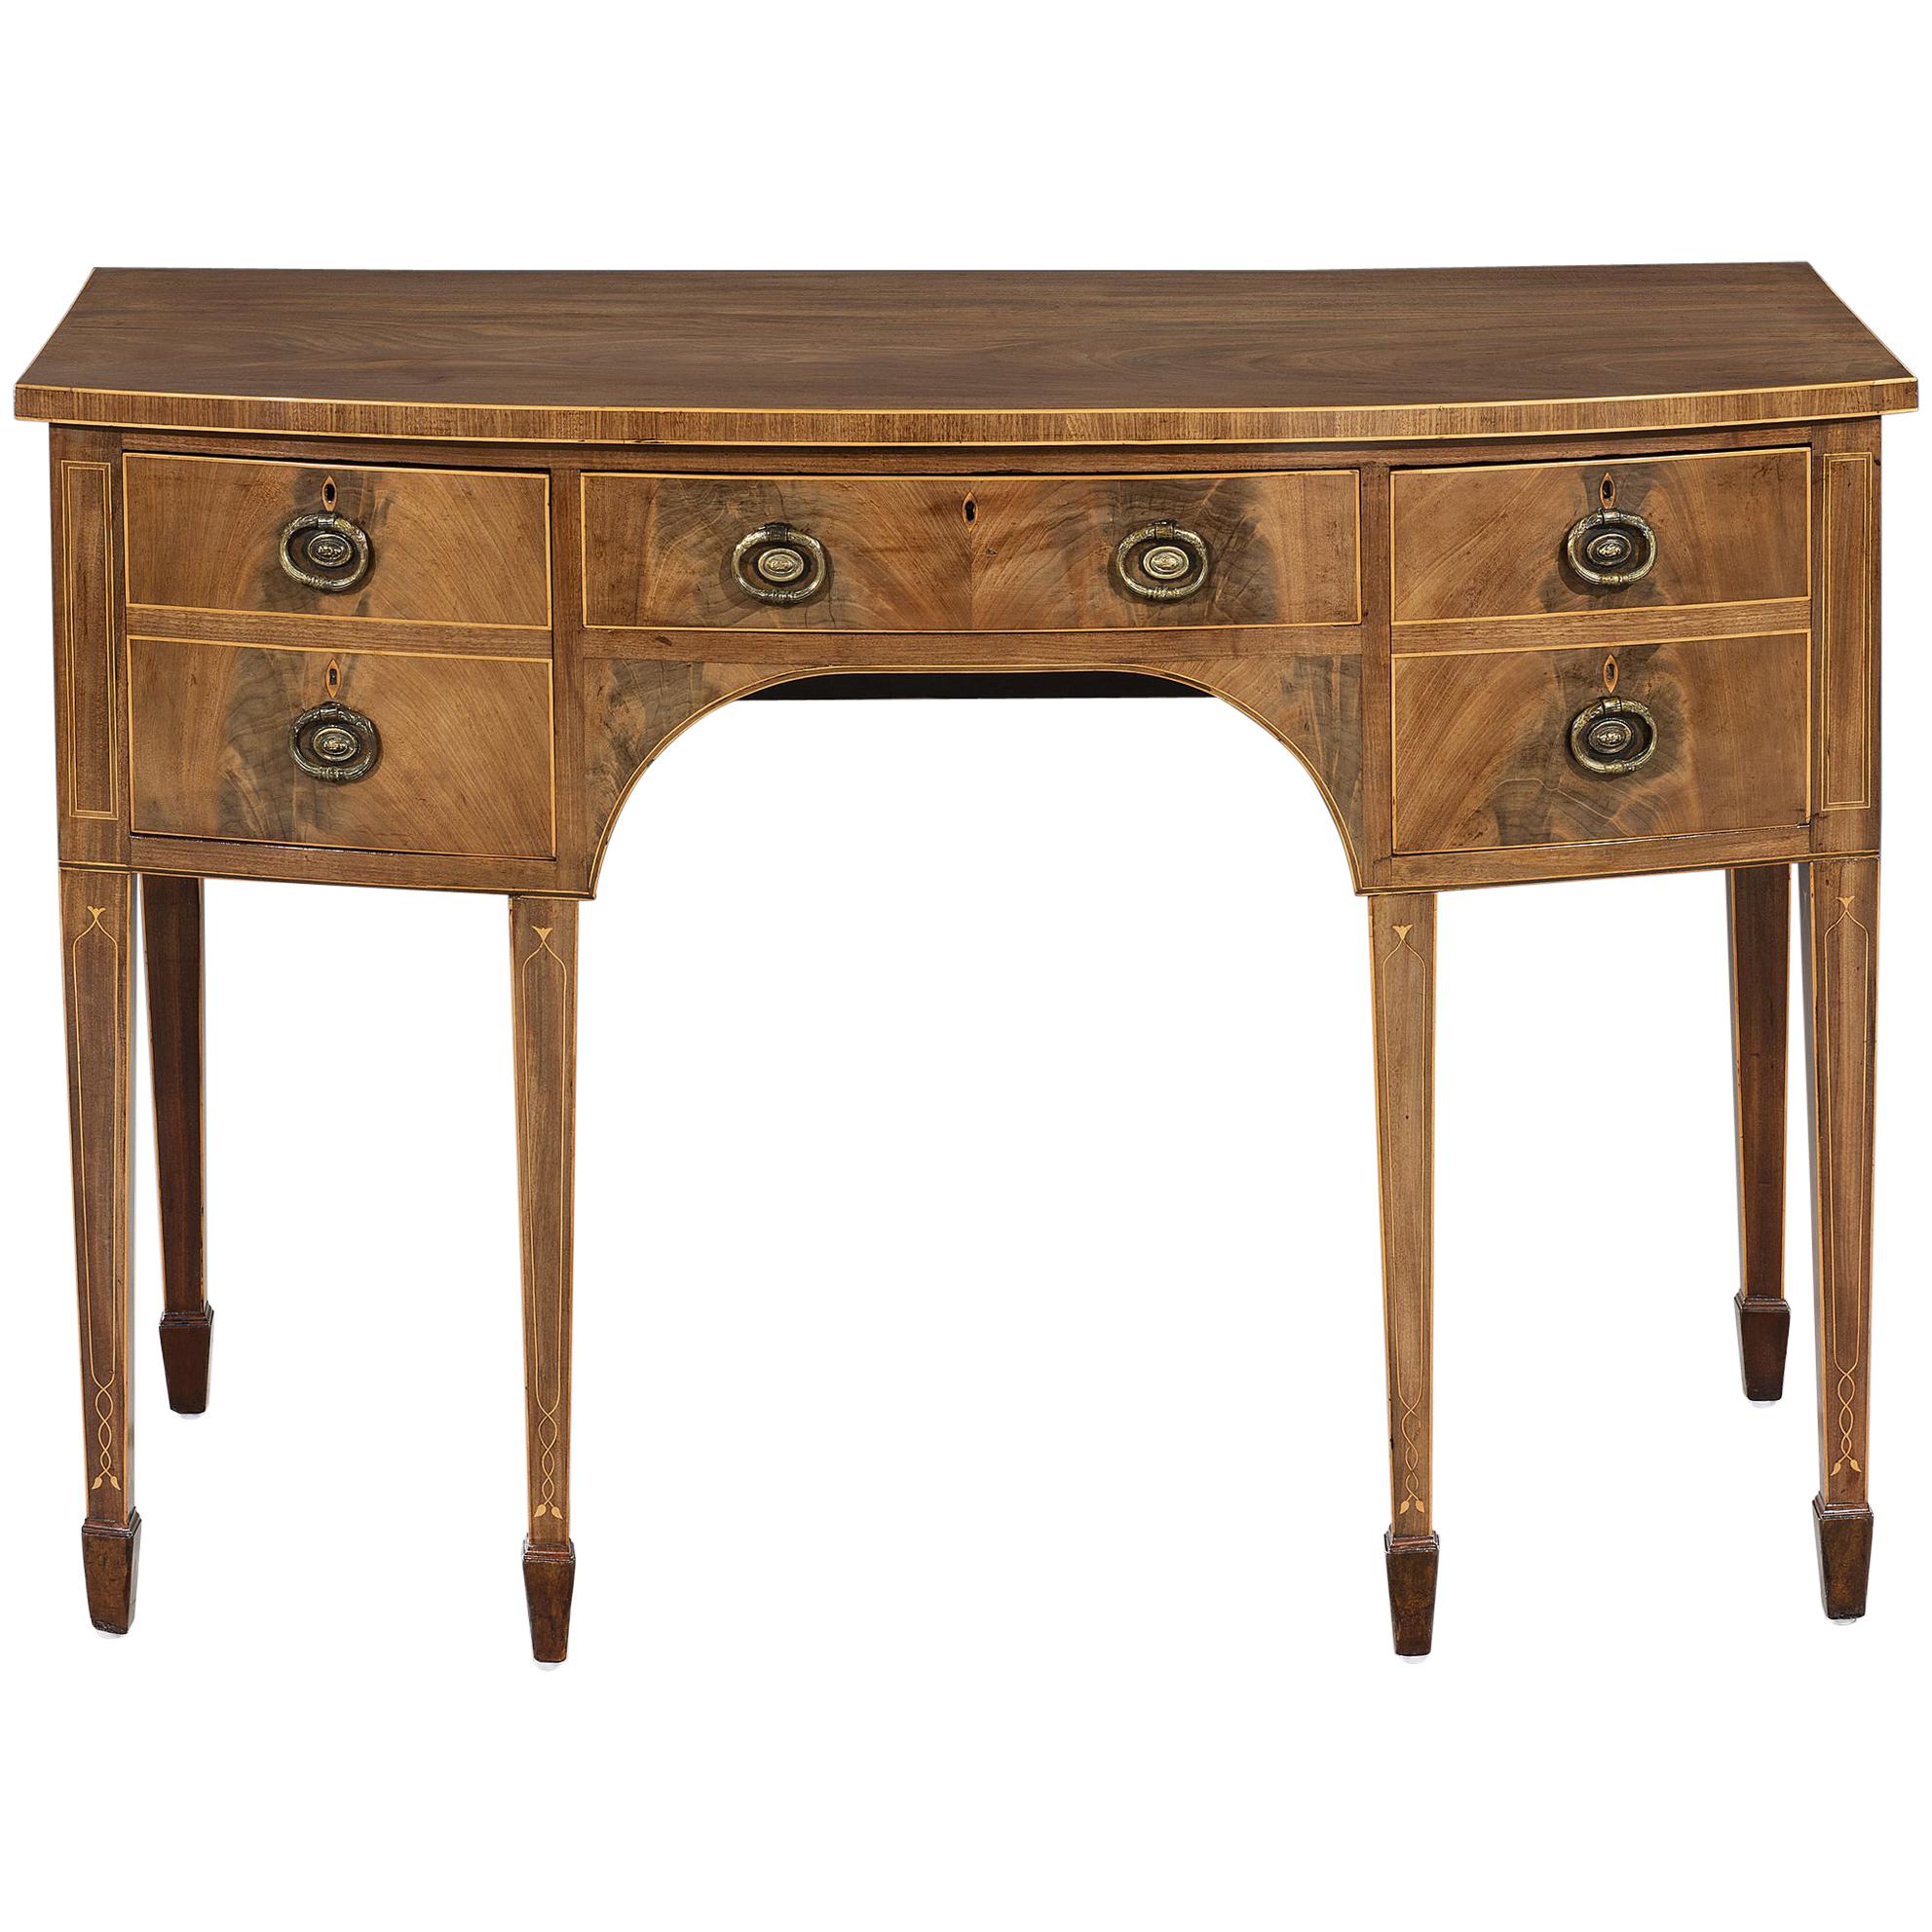 Small George III Sheraton Period Inlaid Mahogany Bow-Fronted Sideboard For Sale